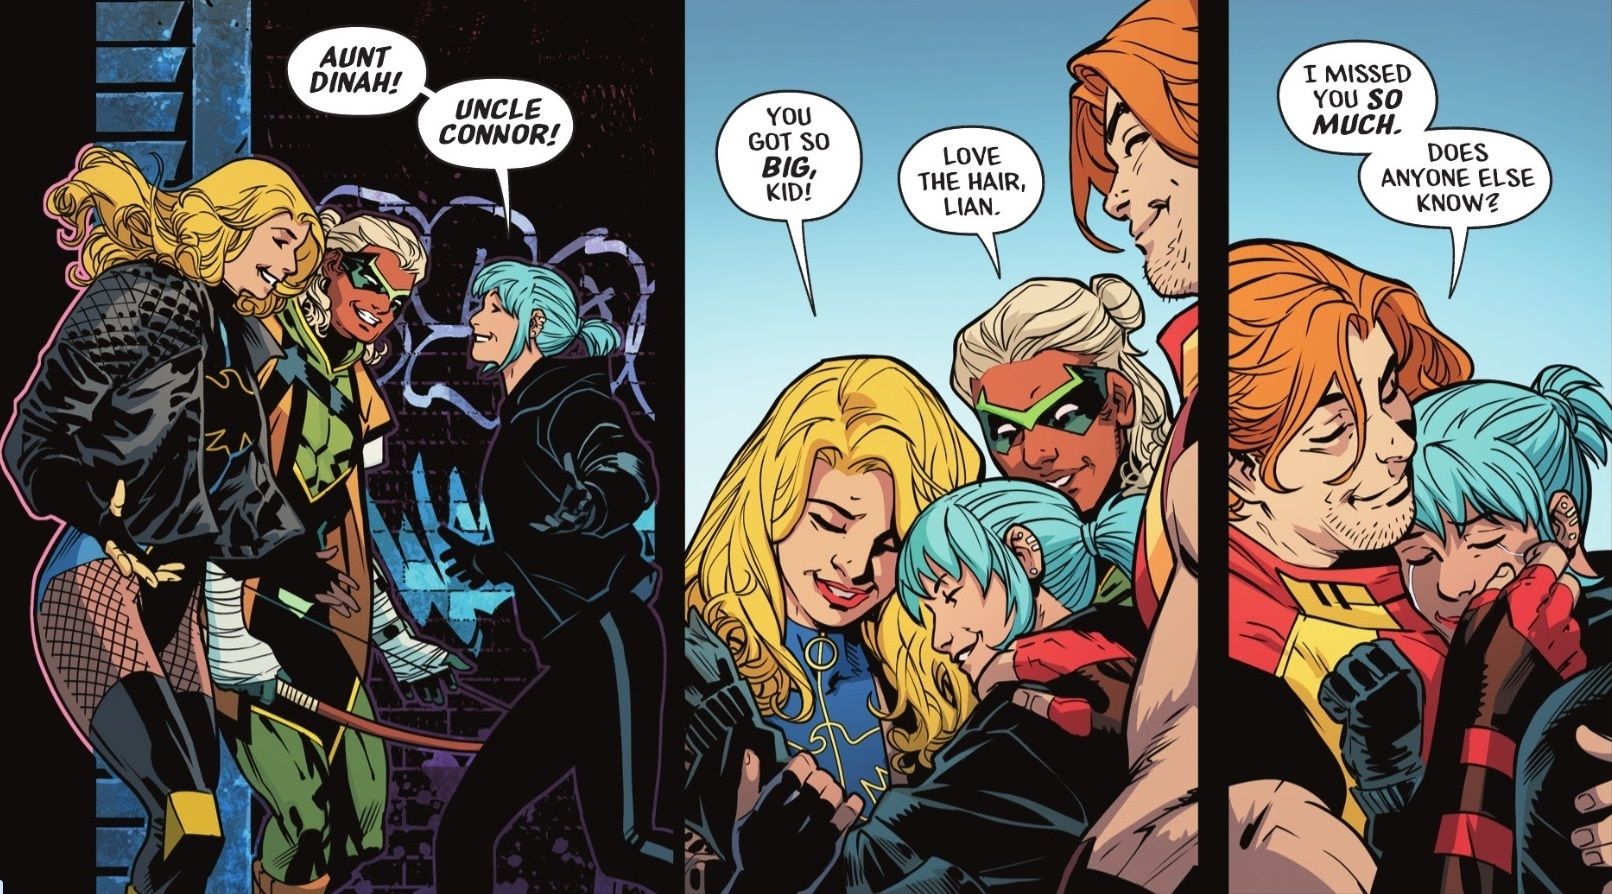 Comic book panels: Black Canary, Roy, and Connor embrace an older Lian, who they thought had been missing.